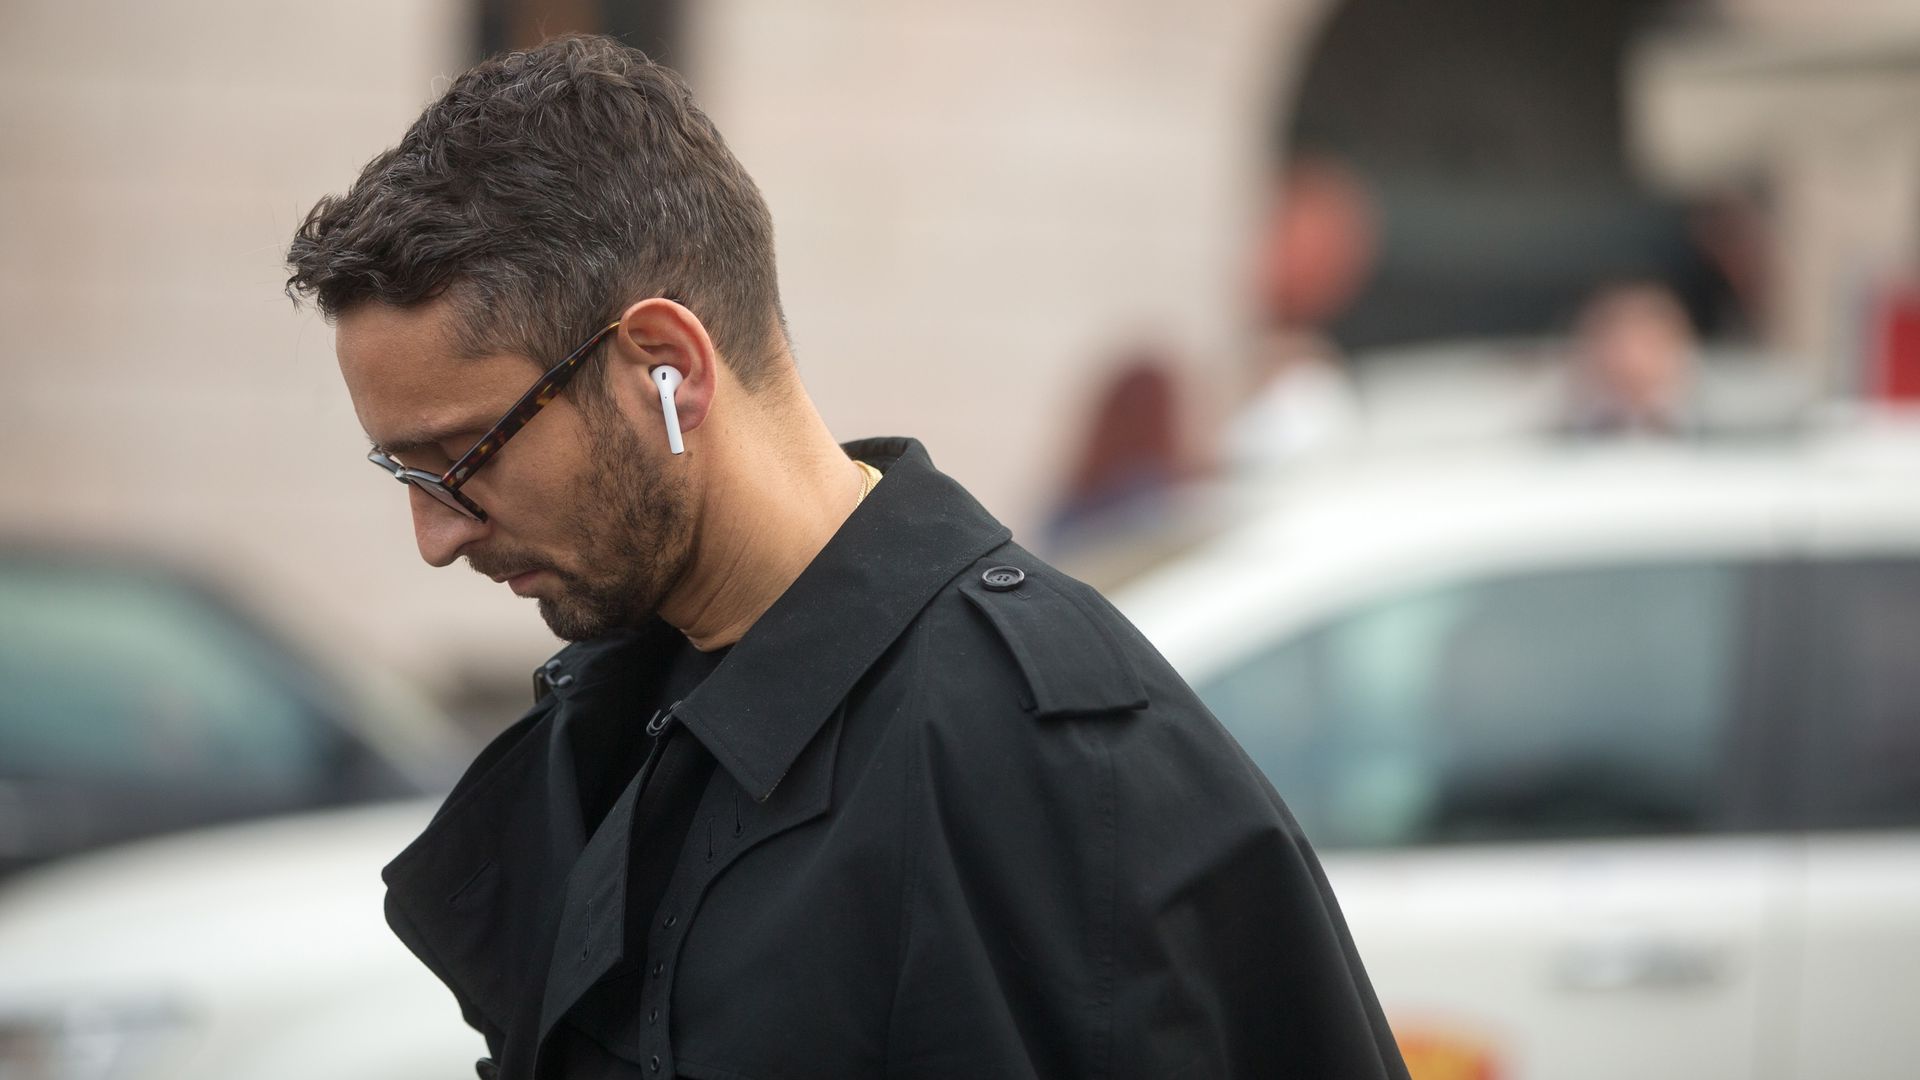 Photo of a man wearing AirPods